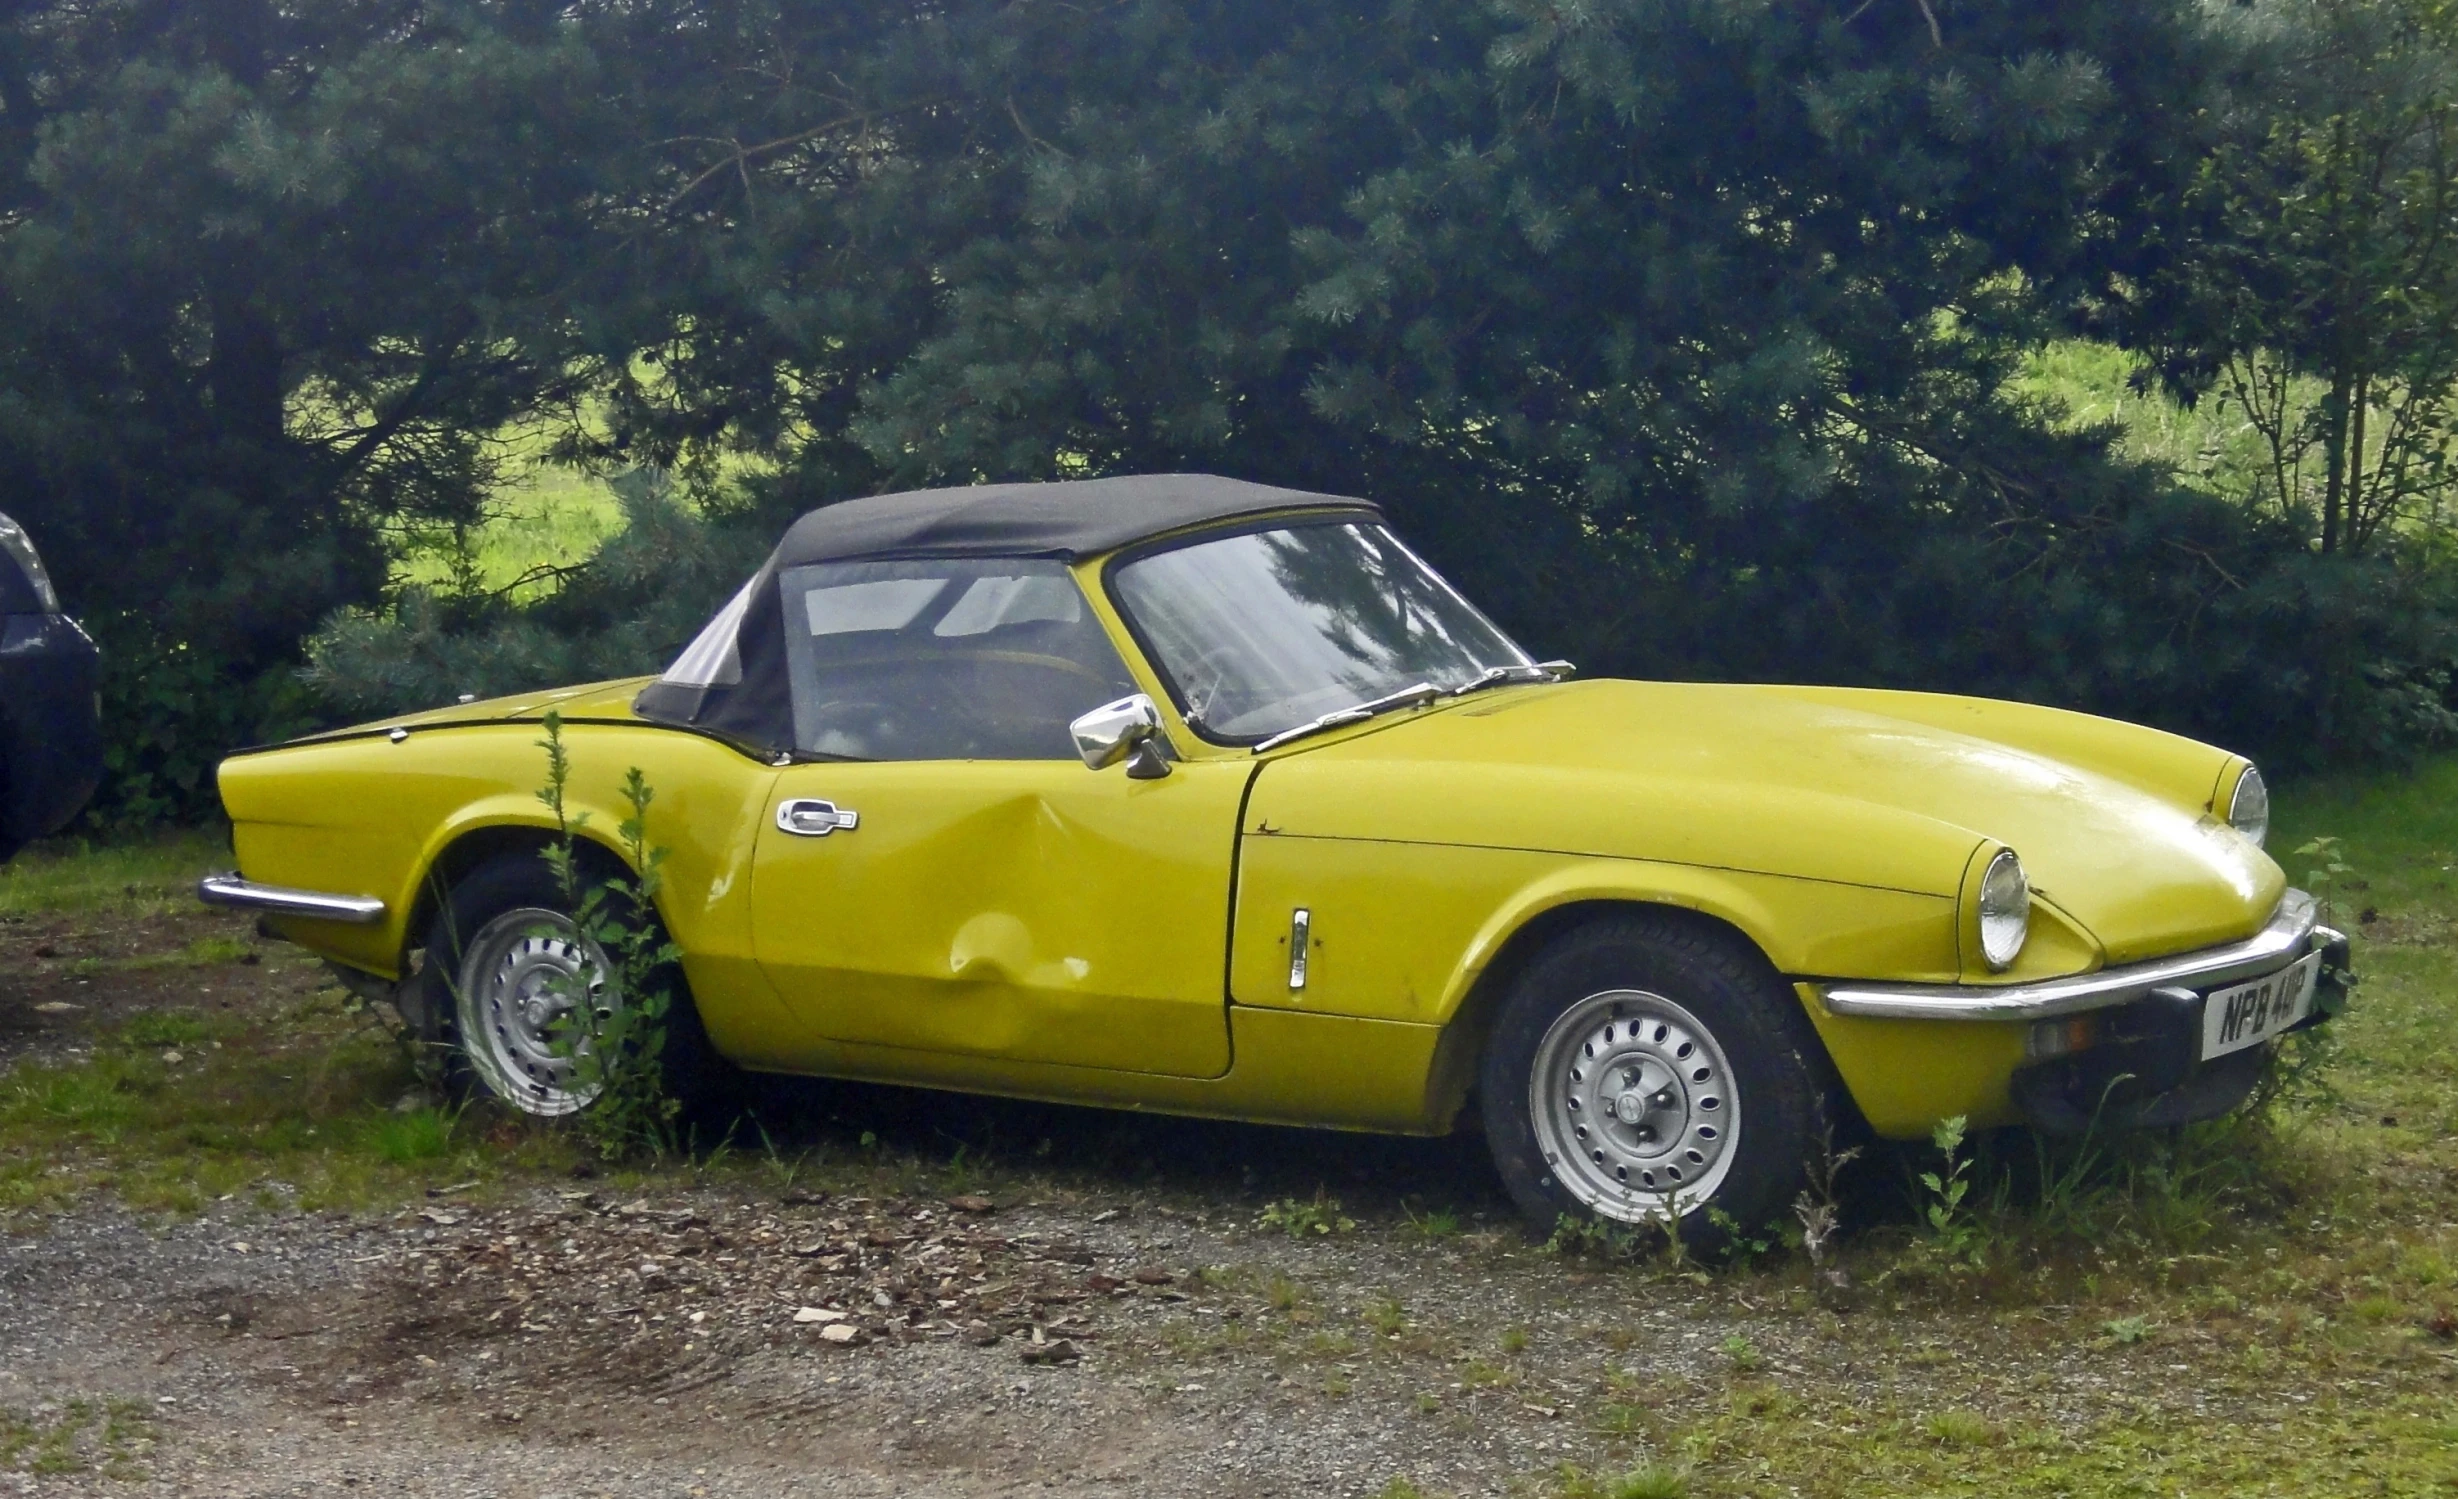 the old yellow sports car is parked by the woods